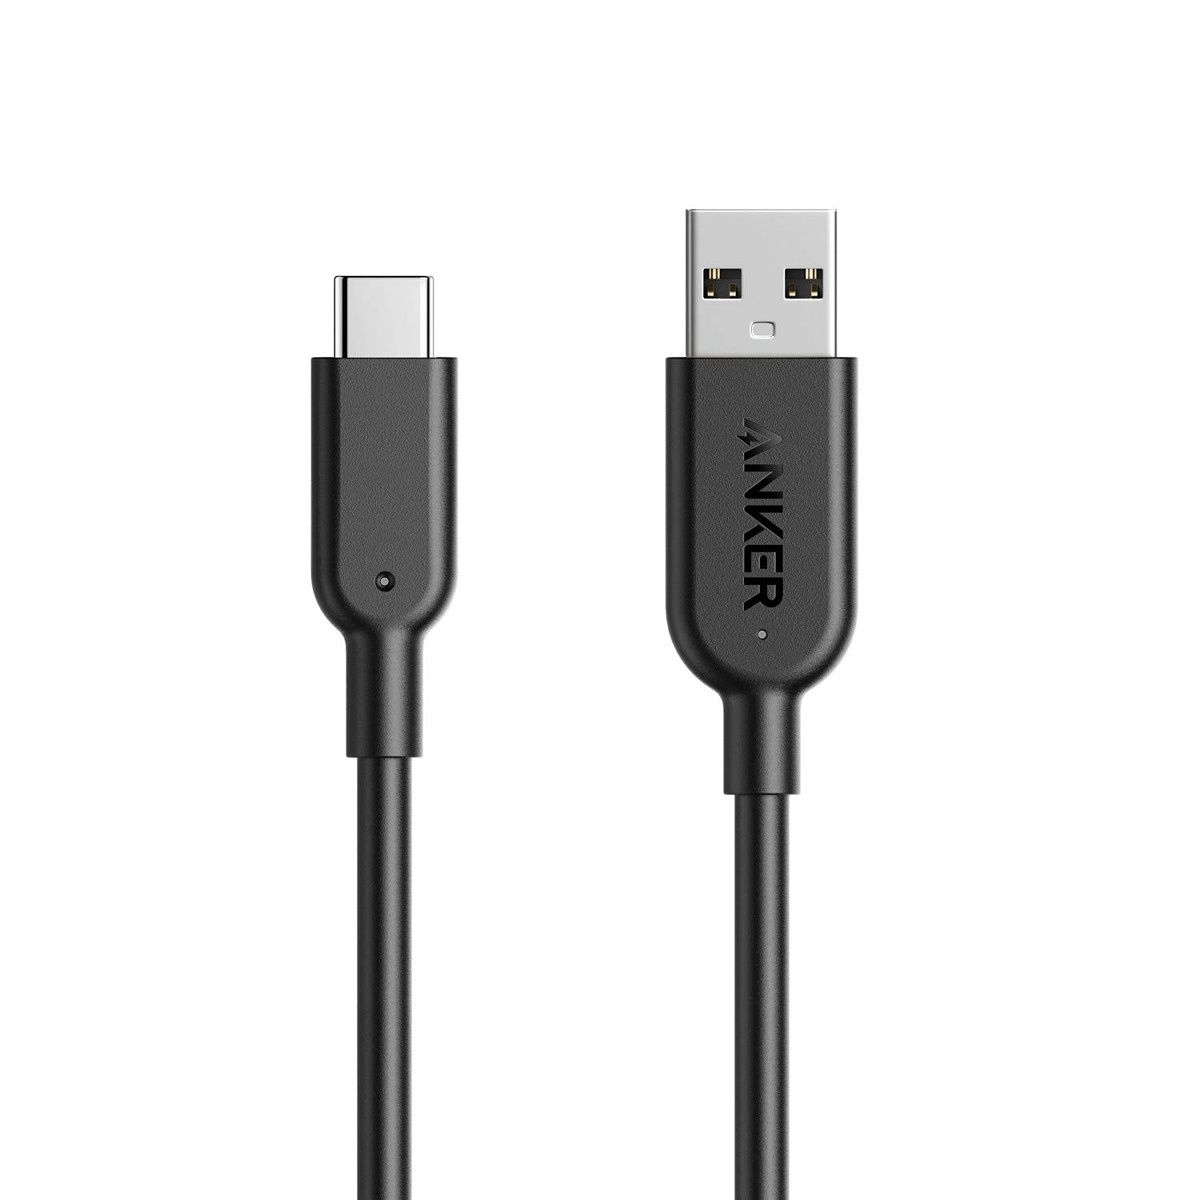 Like the Belkin cable, this Anker Powerline II cable also supports USB SuperSpeed 10Gbps specifications. Additionally, it's capable of 3A charging, and is available in three feet length. The cable comes with lifetime warranty.